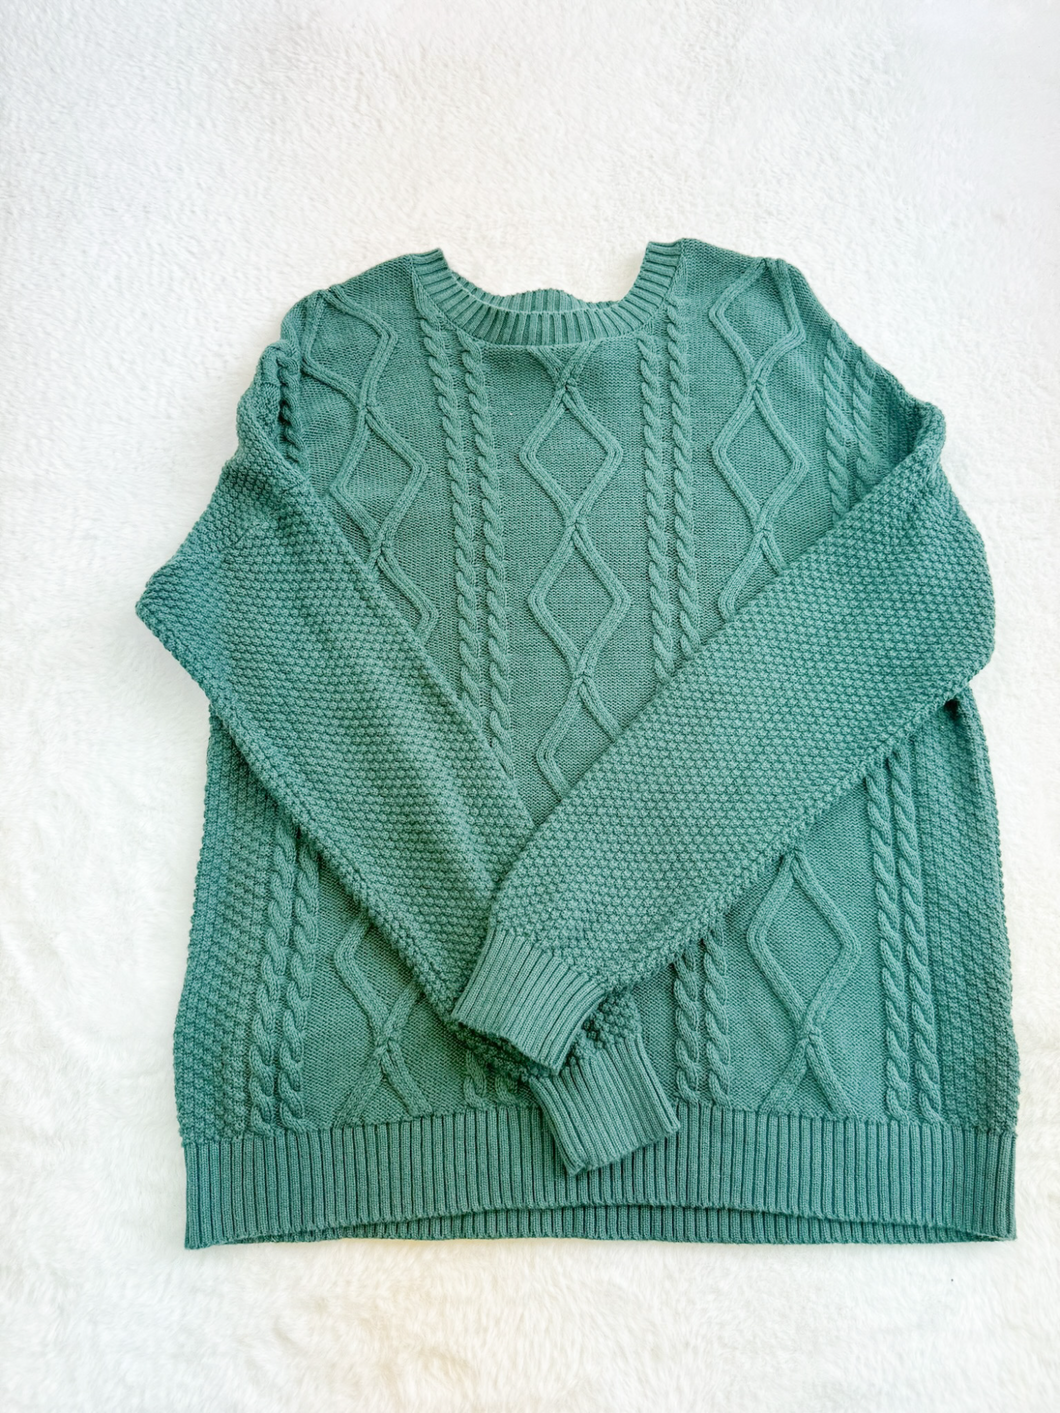 Hollister Sweater Size Small P0365